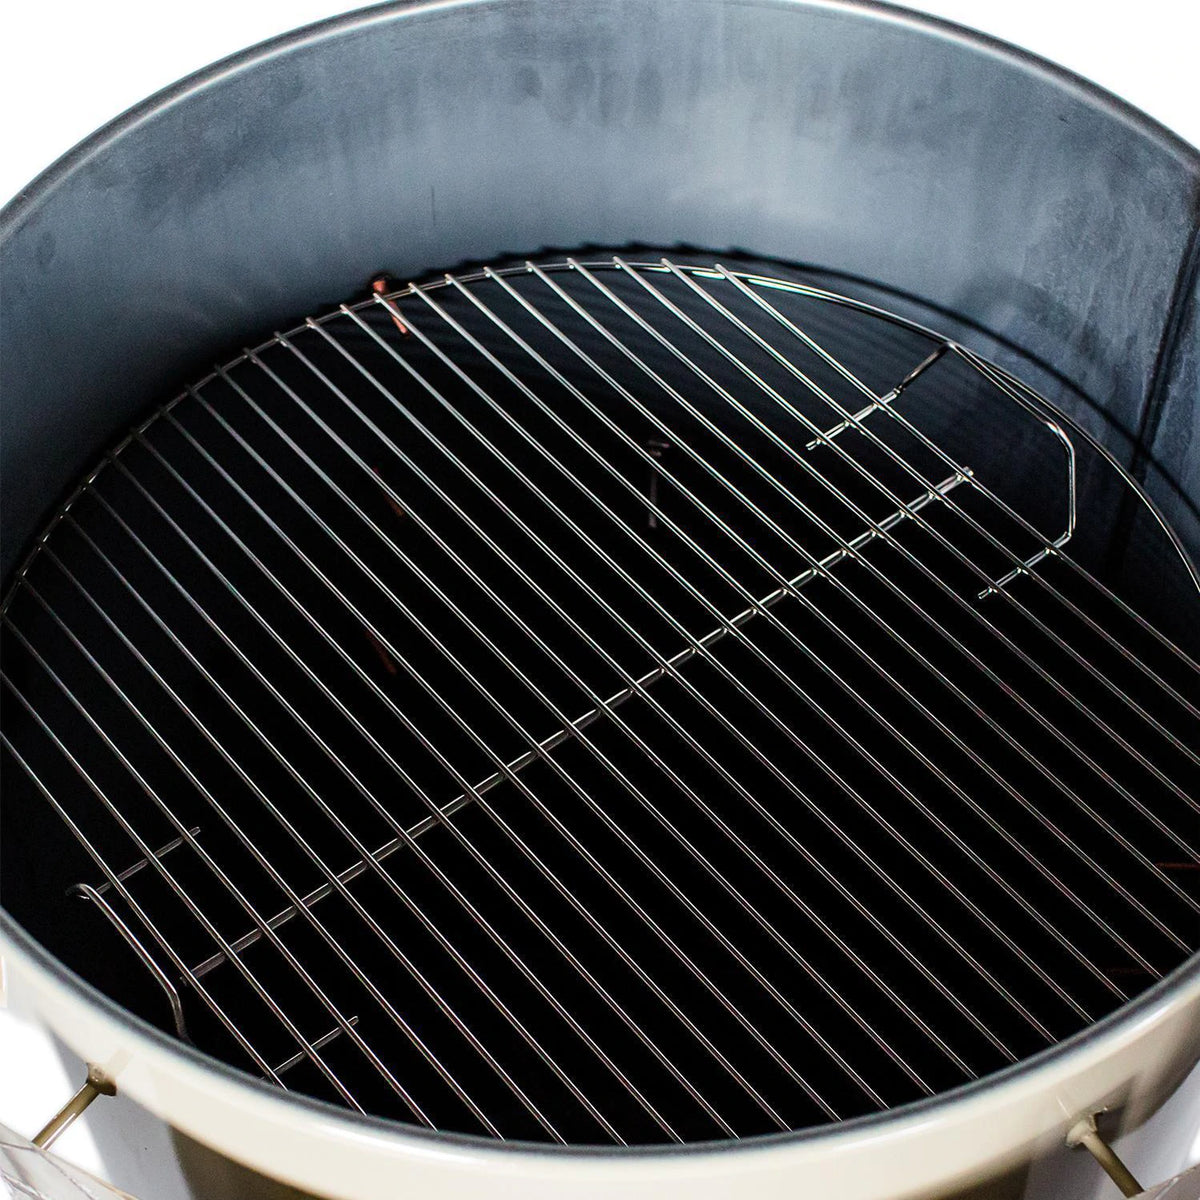 Gateway Drum Smokers 55111 55 Gallon Charcoal BBQ Smoker - Interior View With Cooking Grate